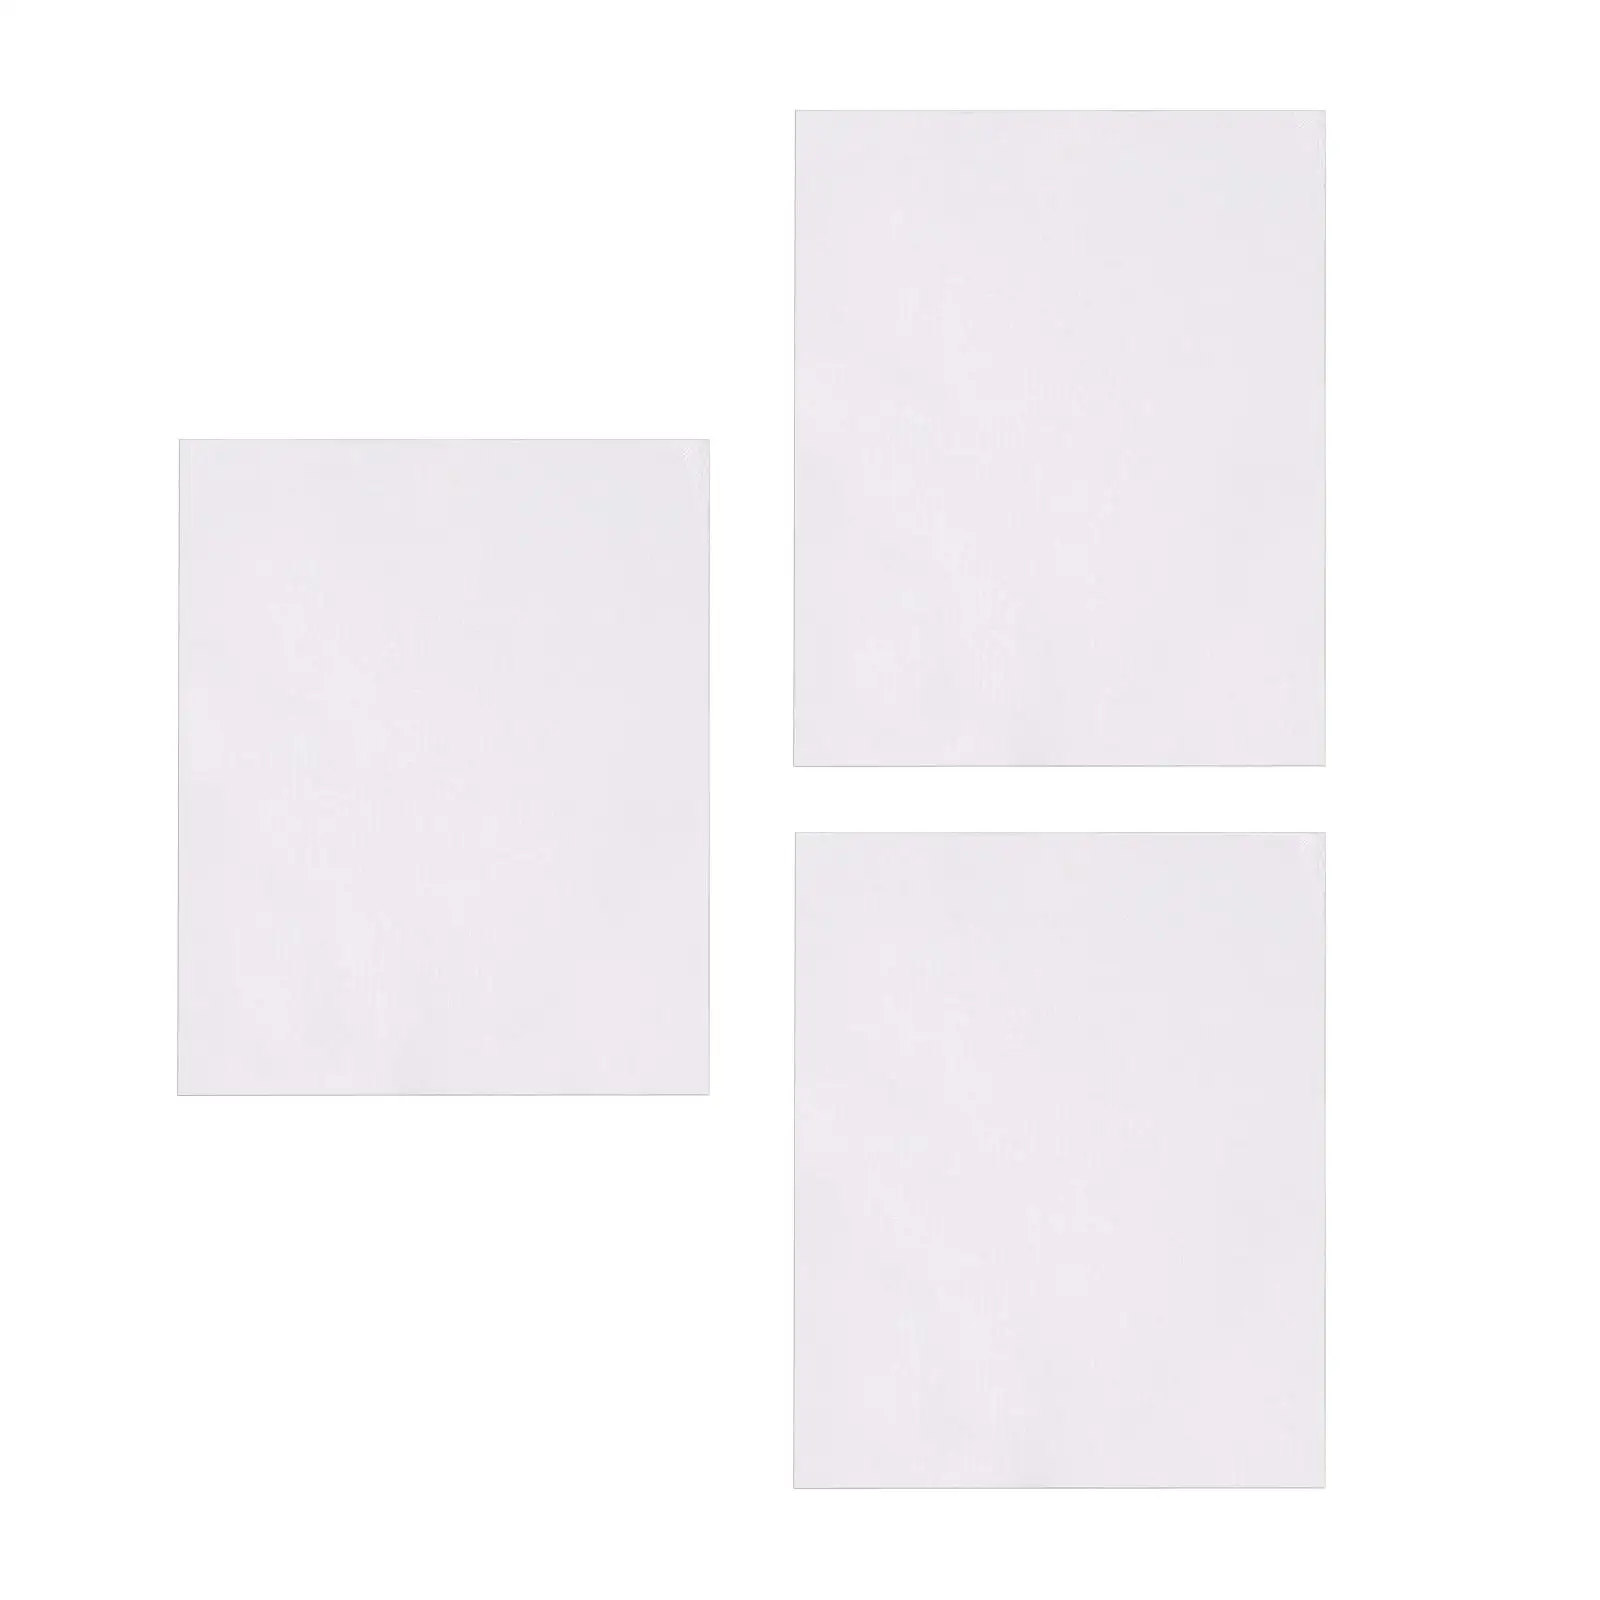 3x Canvas Panels Acrylic Oil Painting Canvas Art Boards Artist Boards Cotton Artist Blank Canvas Boards for Painter Oil Painting